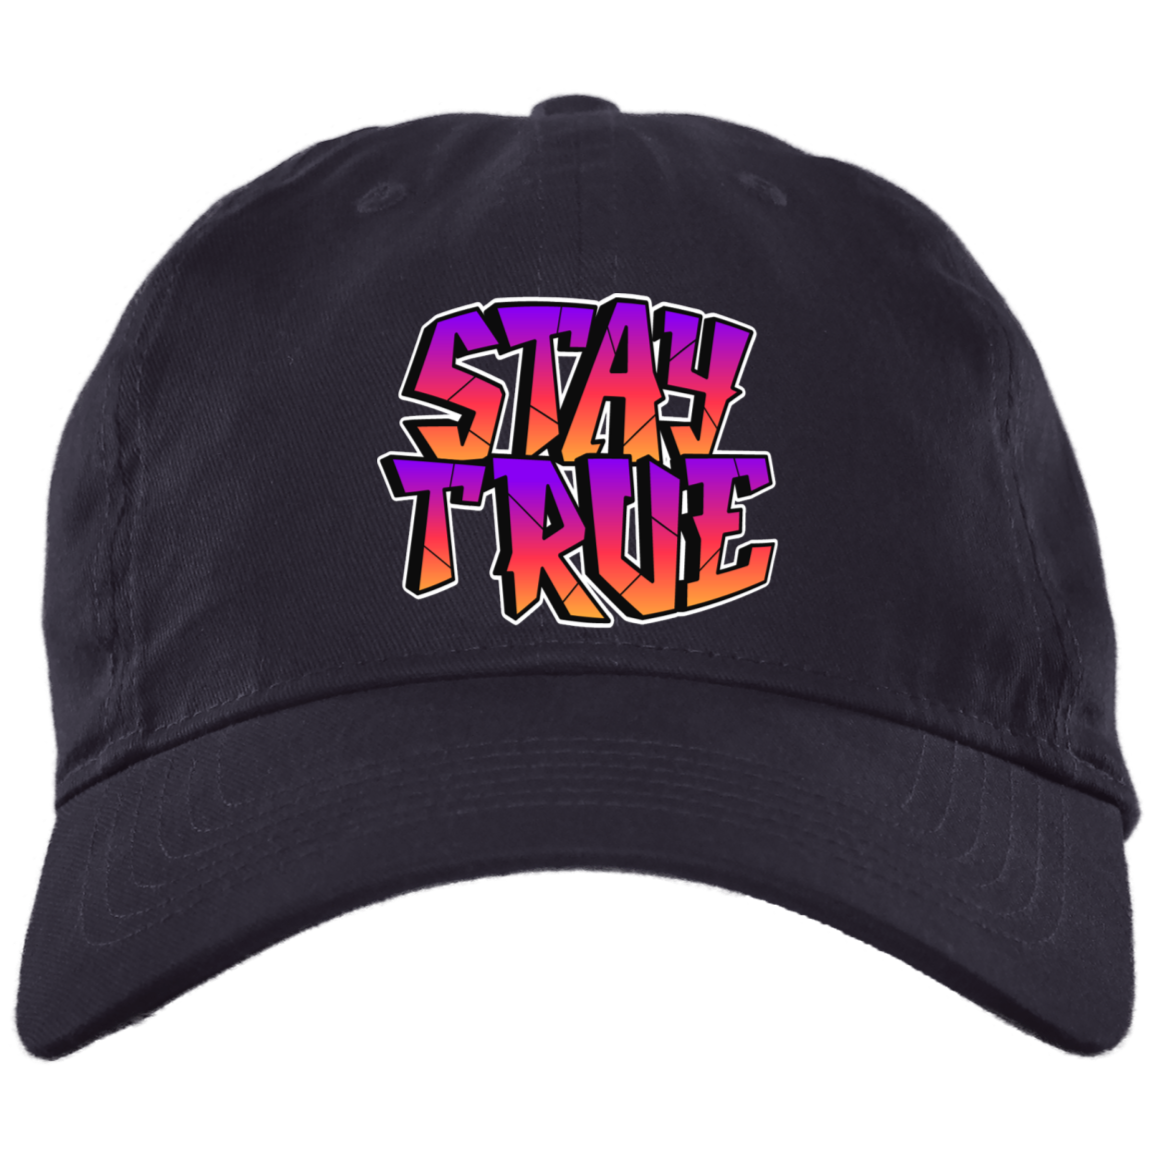 Stay True Embroidered Brushed Twill Unstructured Dad Cap